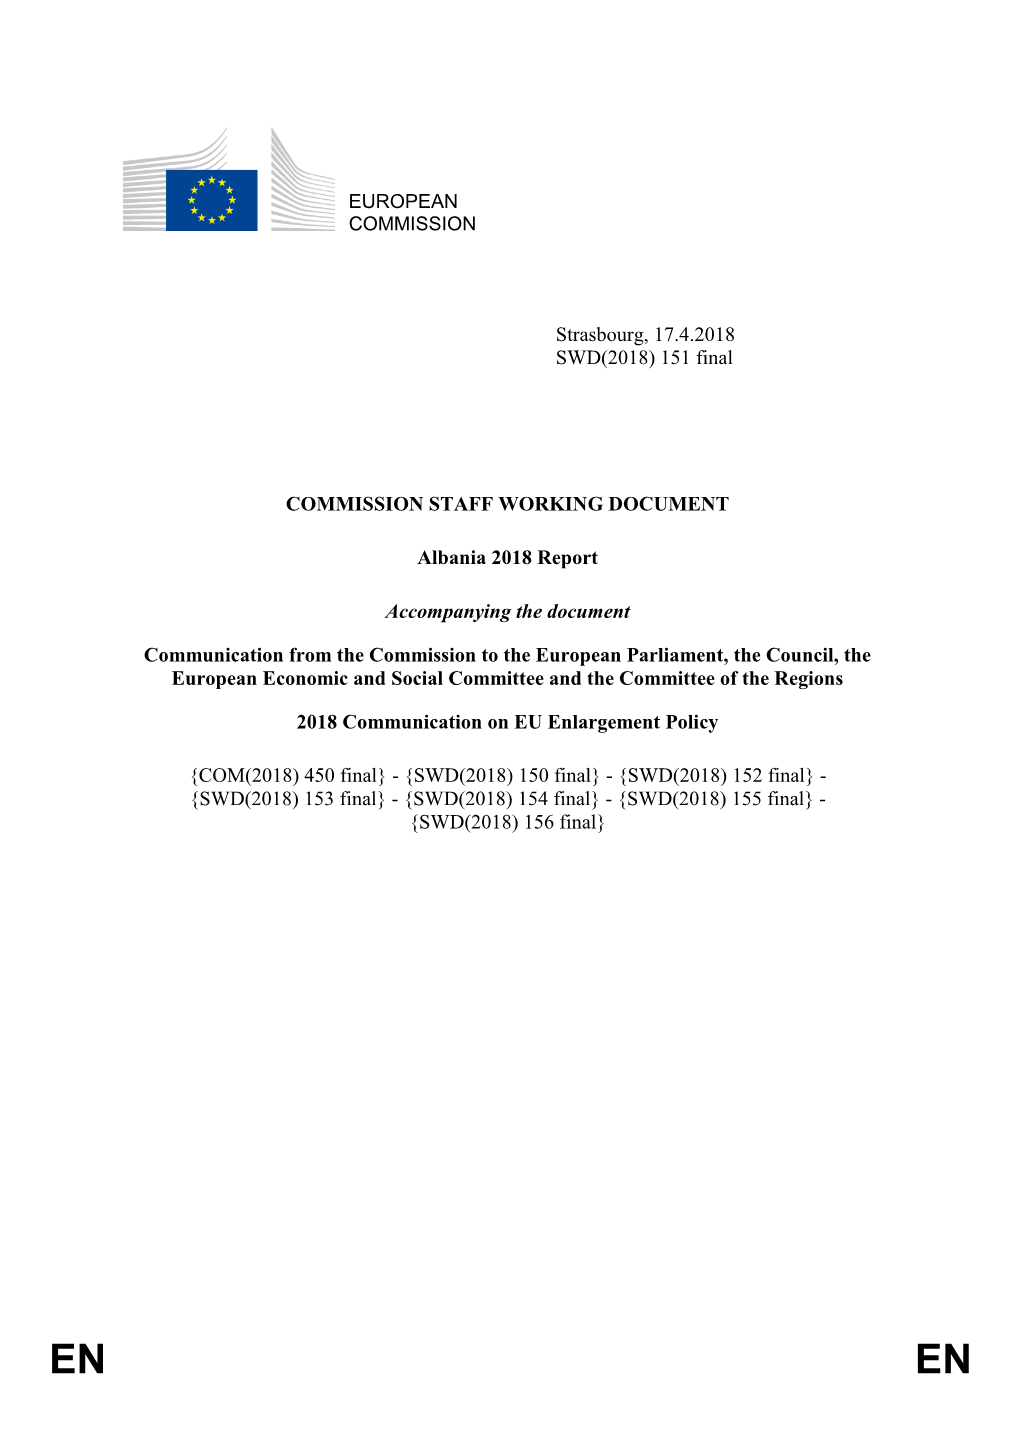 Commission Staff Working Document, Albania 2018 Report